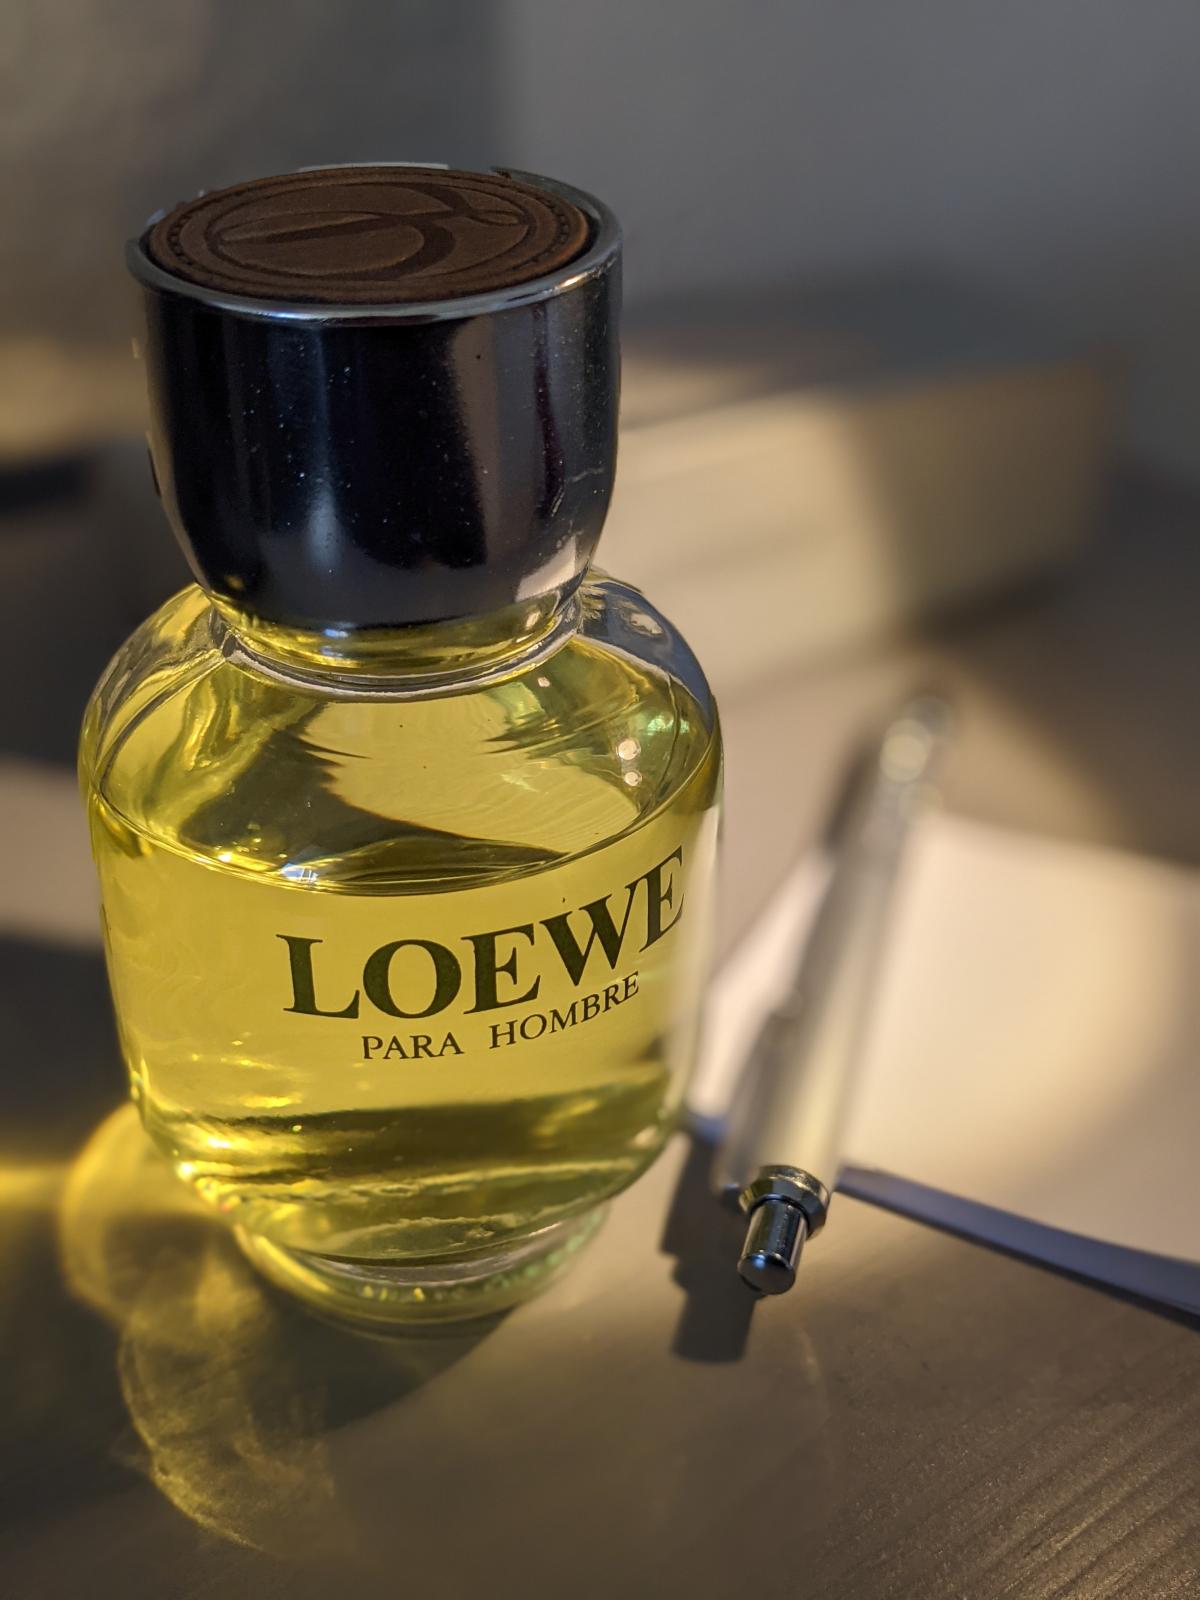 Loewe Pour Homme Loewe cologne - a fragrance for men 1974